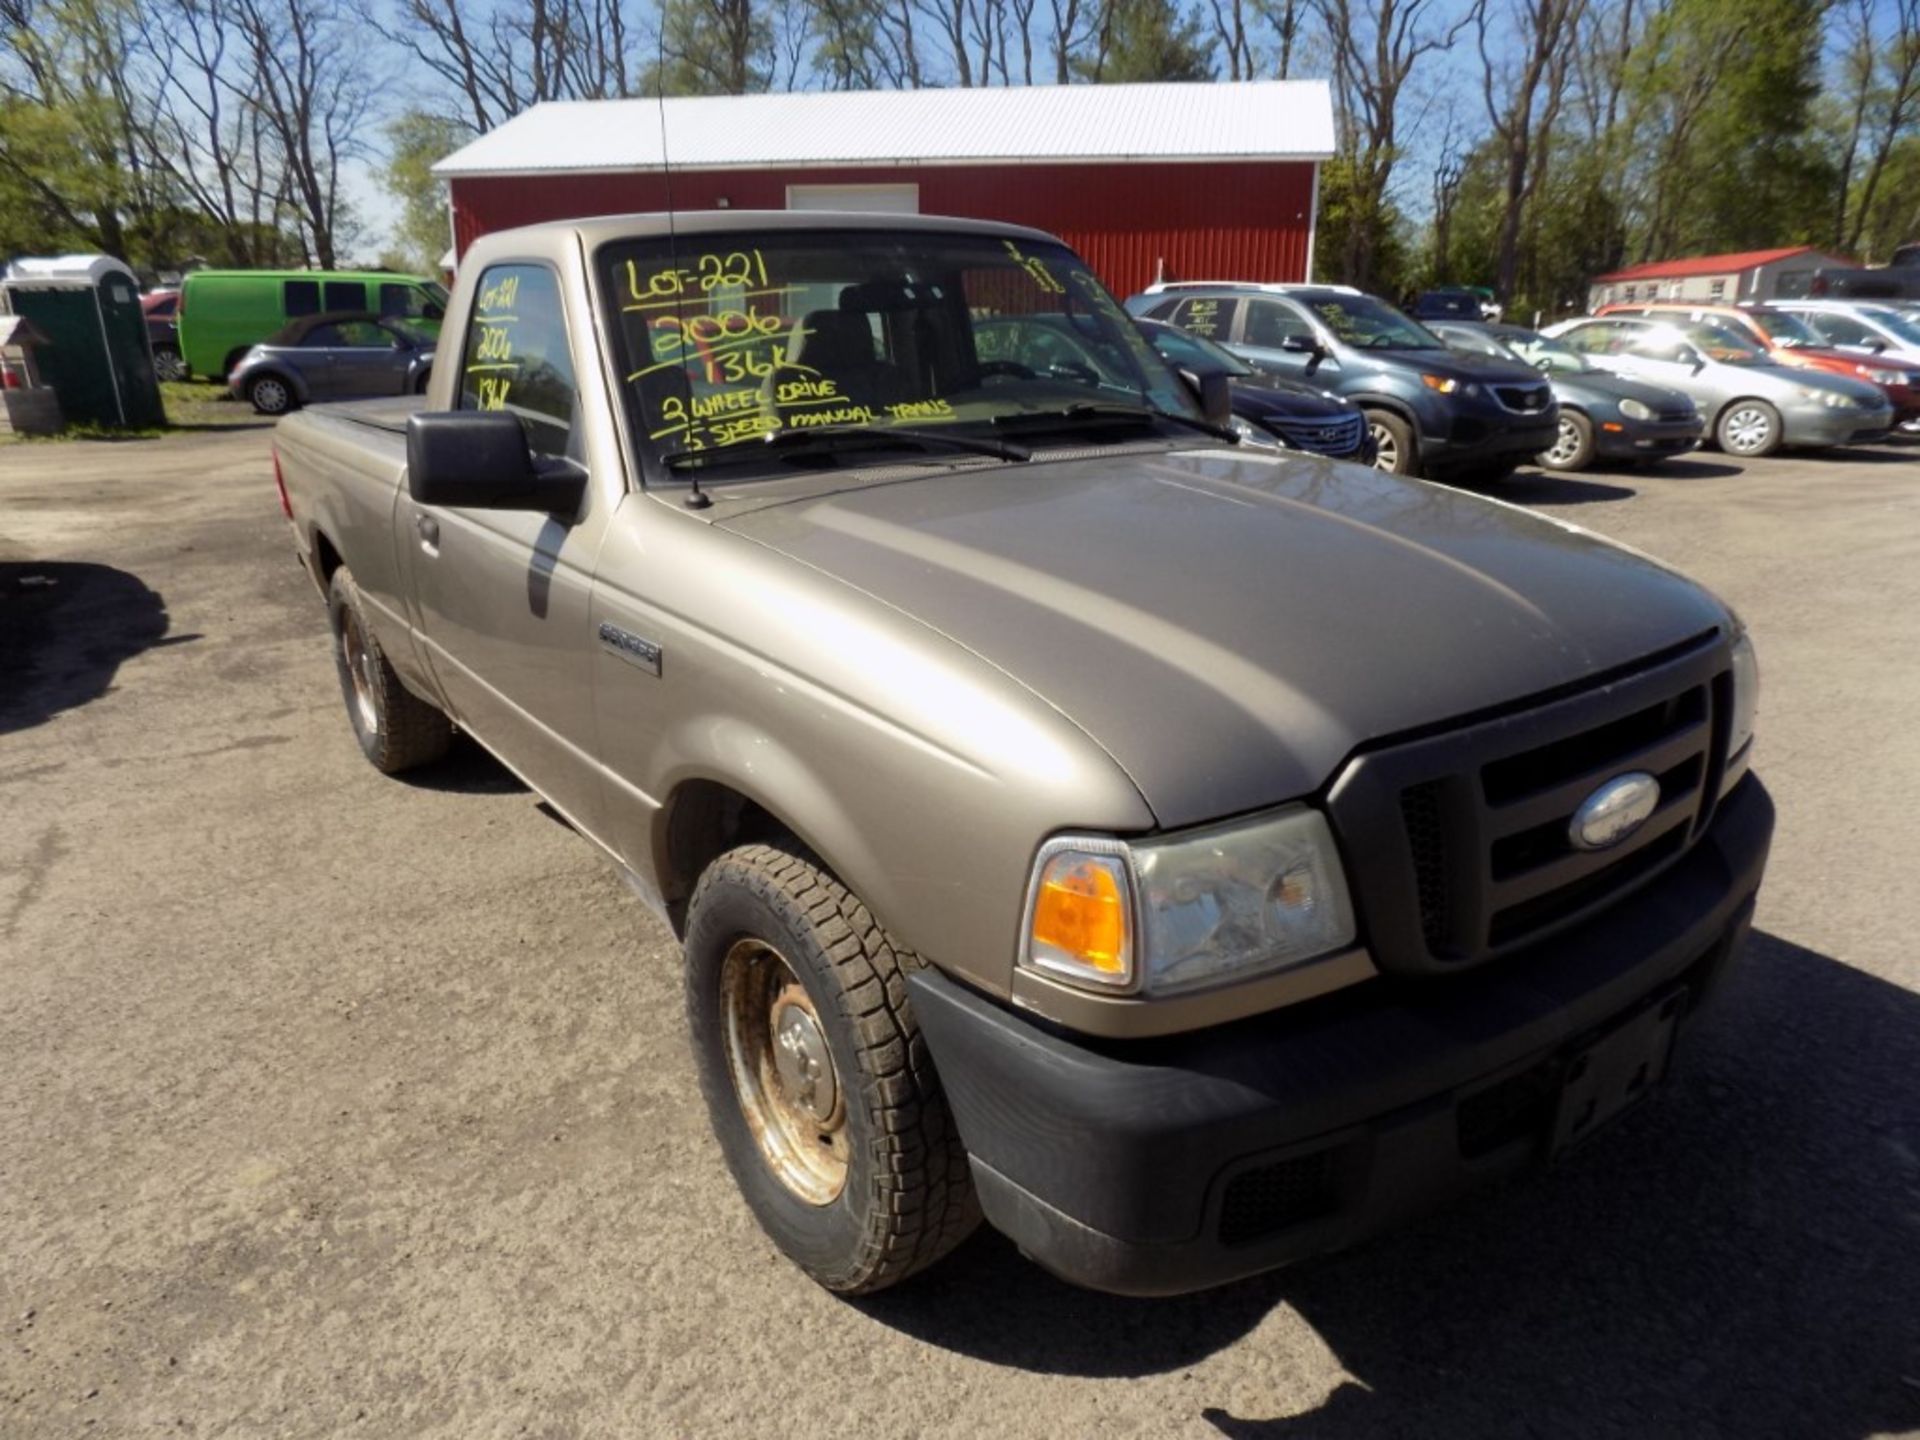 2006 Ford Ranger XLT Reg. Cab, 2 WD, Gold, 5 Speed Manual Trans., Toneau Cover, 136,652 Miles, Vin #